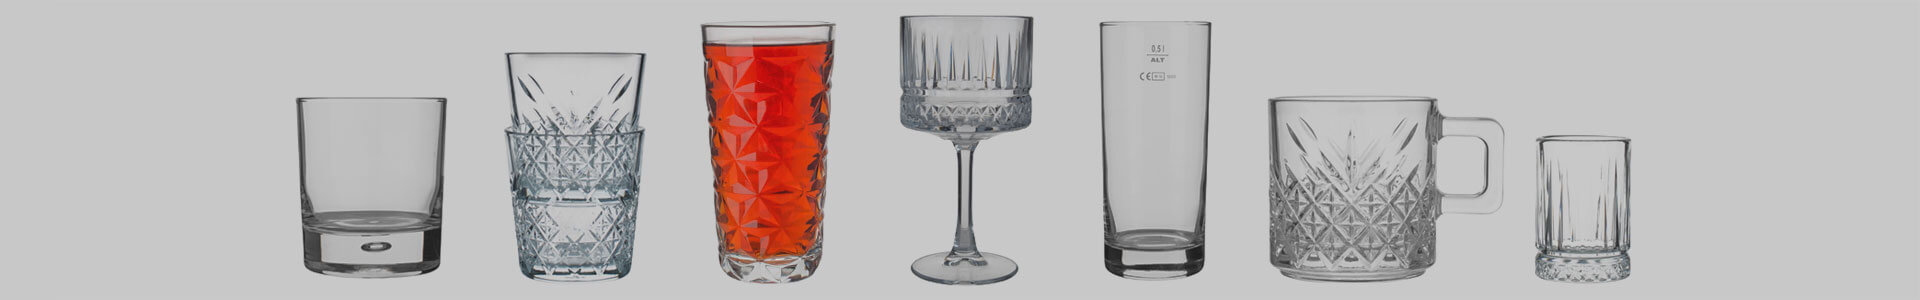 Various glasses from the manufacturer Pasabahce stand next to each other.